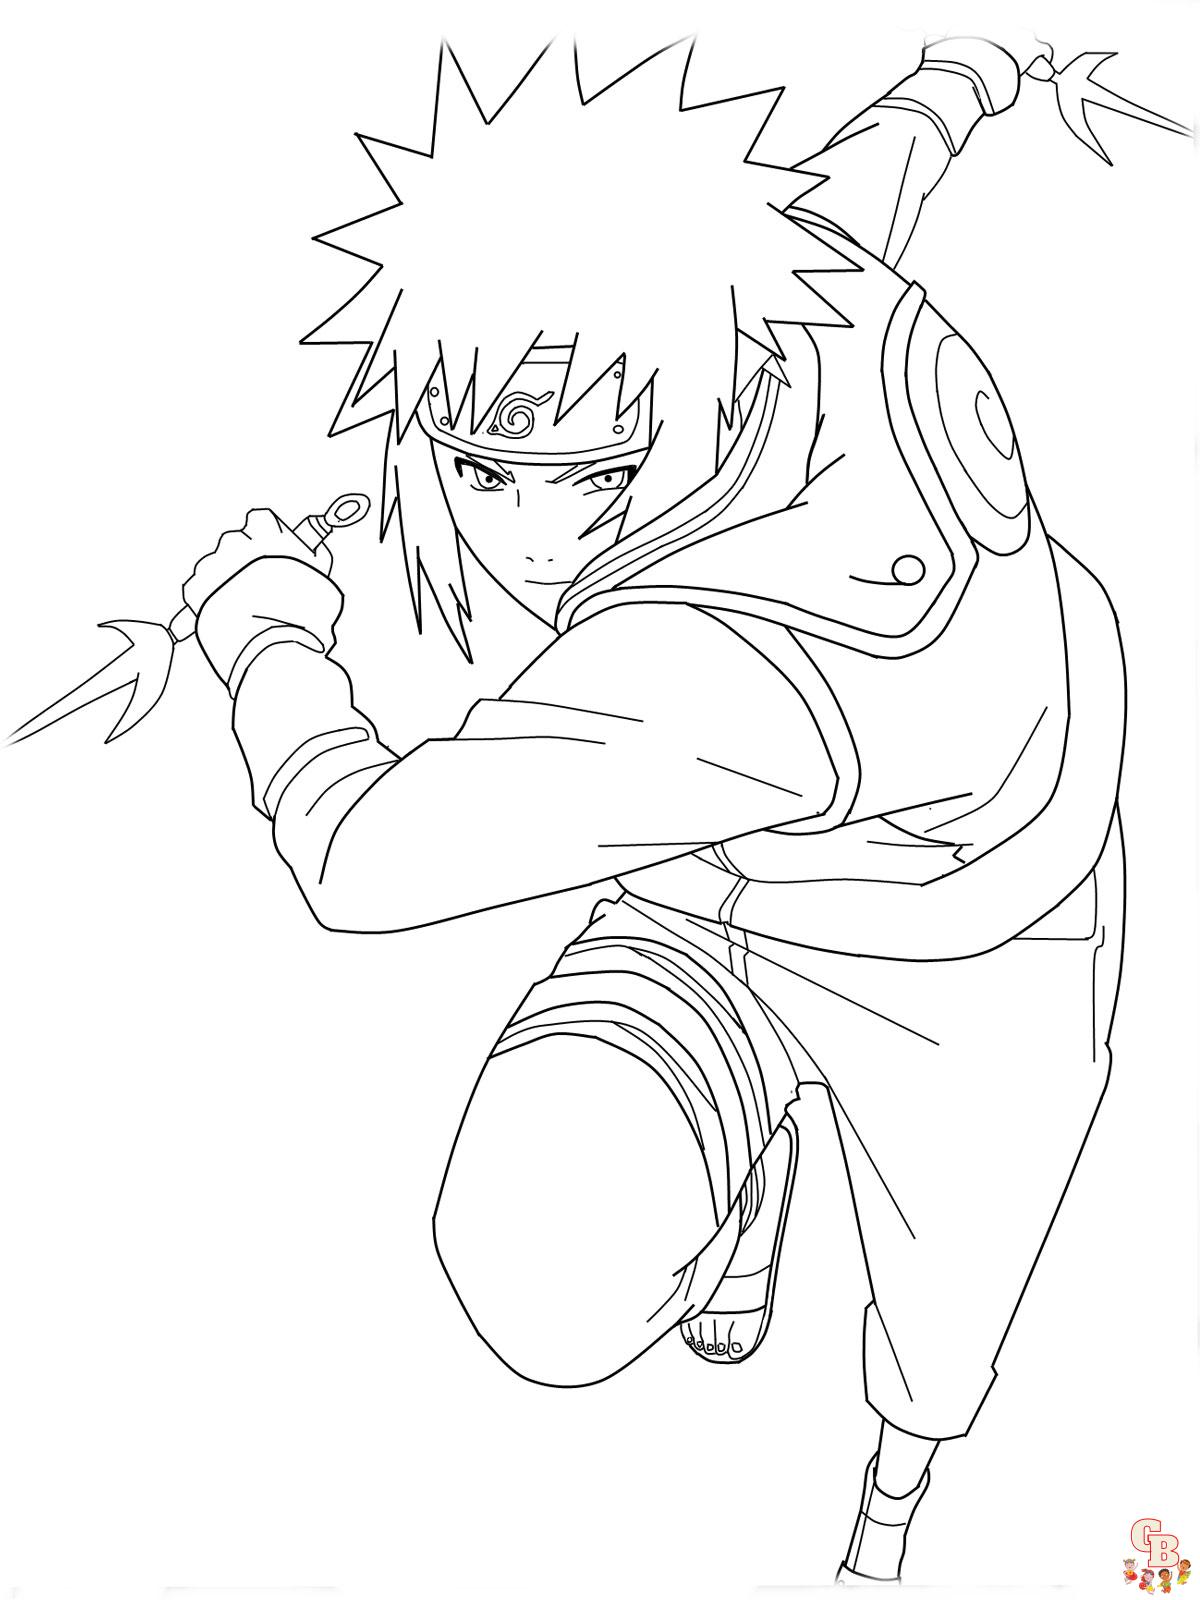 Free Naruto Coloring Pages for Kids and Adults   GBcoloring